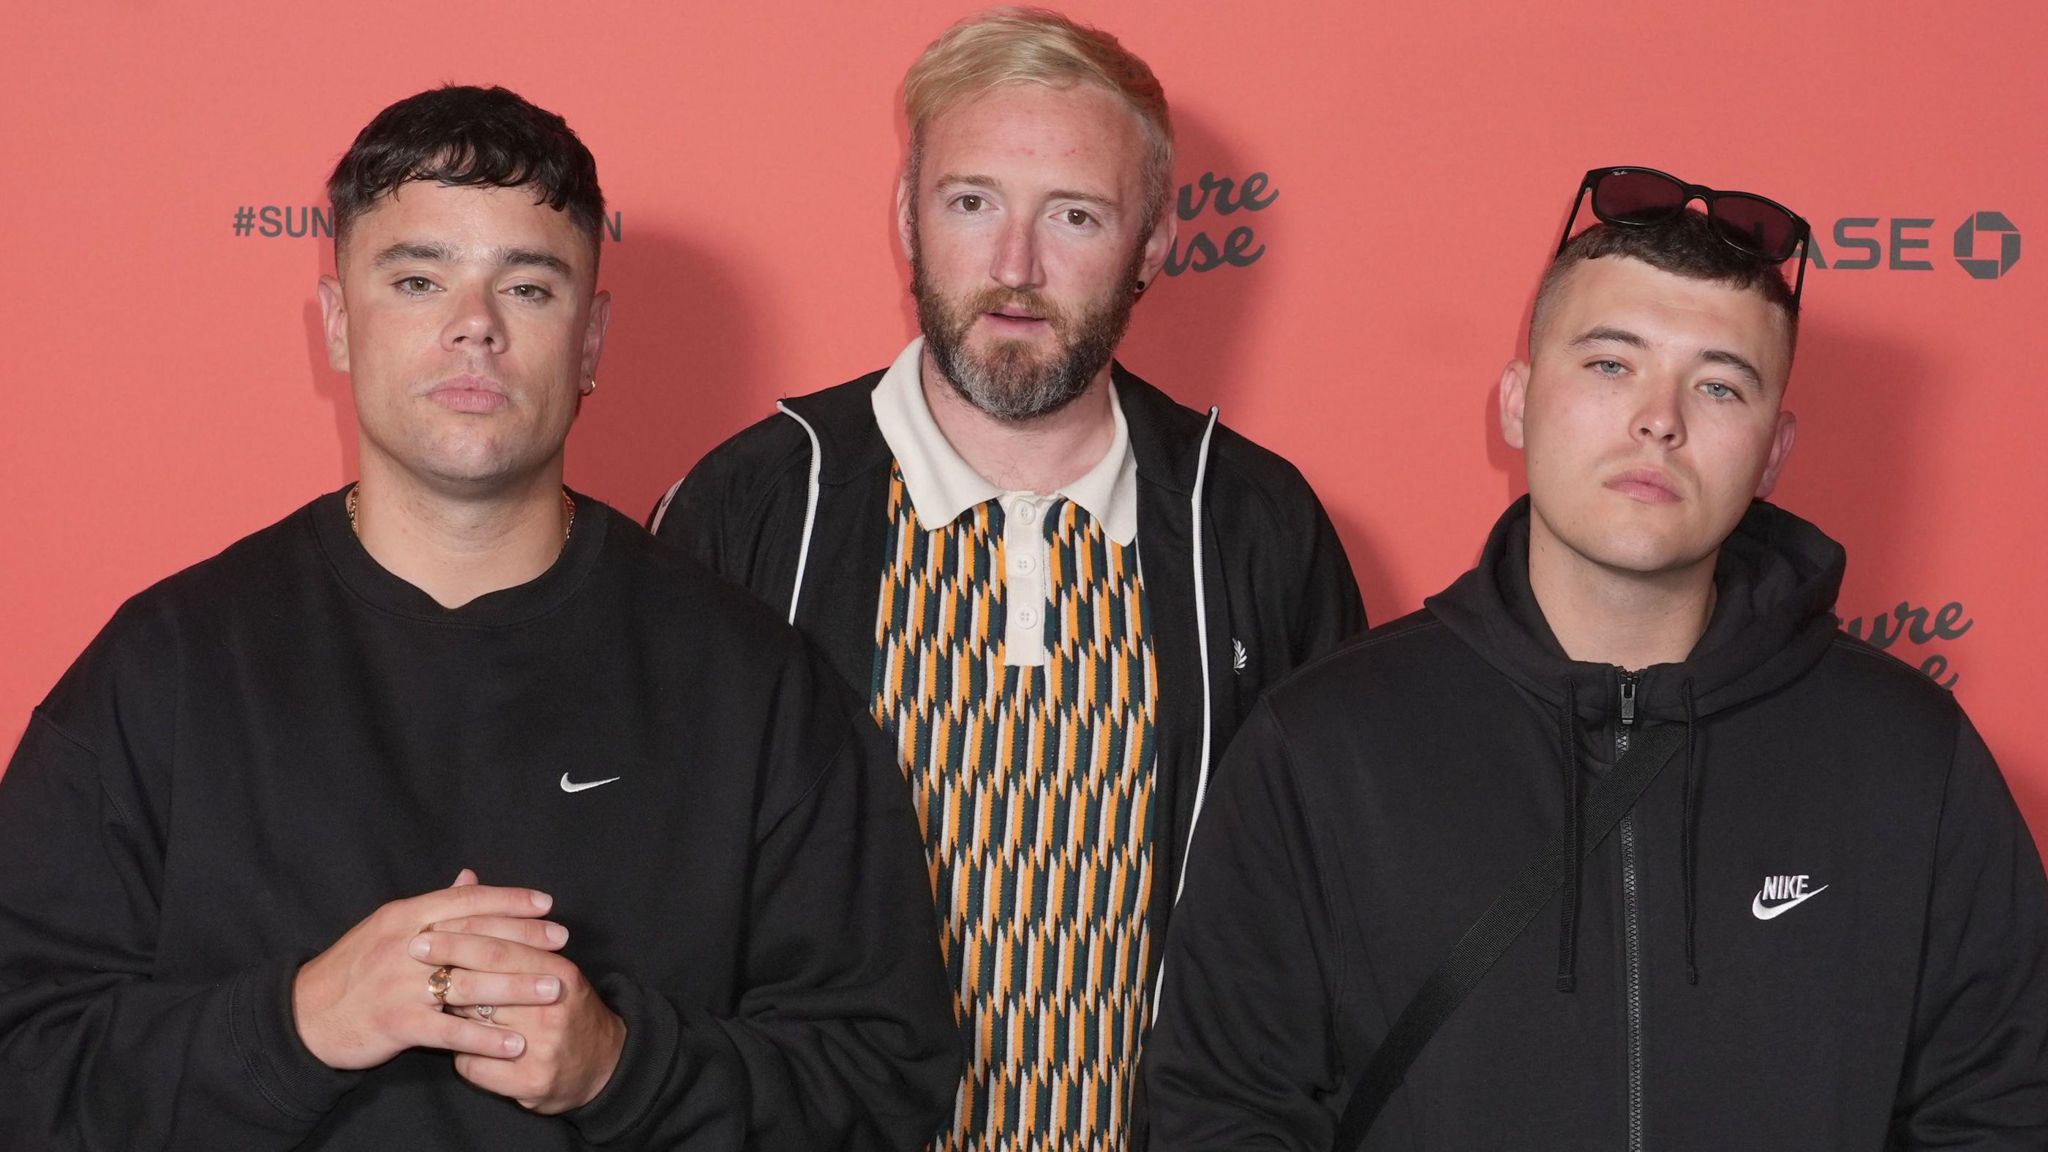 The three band members looking at the camera. One has sunglasses on his head with a dark hoodie. One is wearing a ring and a dark jumper. The other member stnds behind the first two and is wearing a colourful patterned top